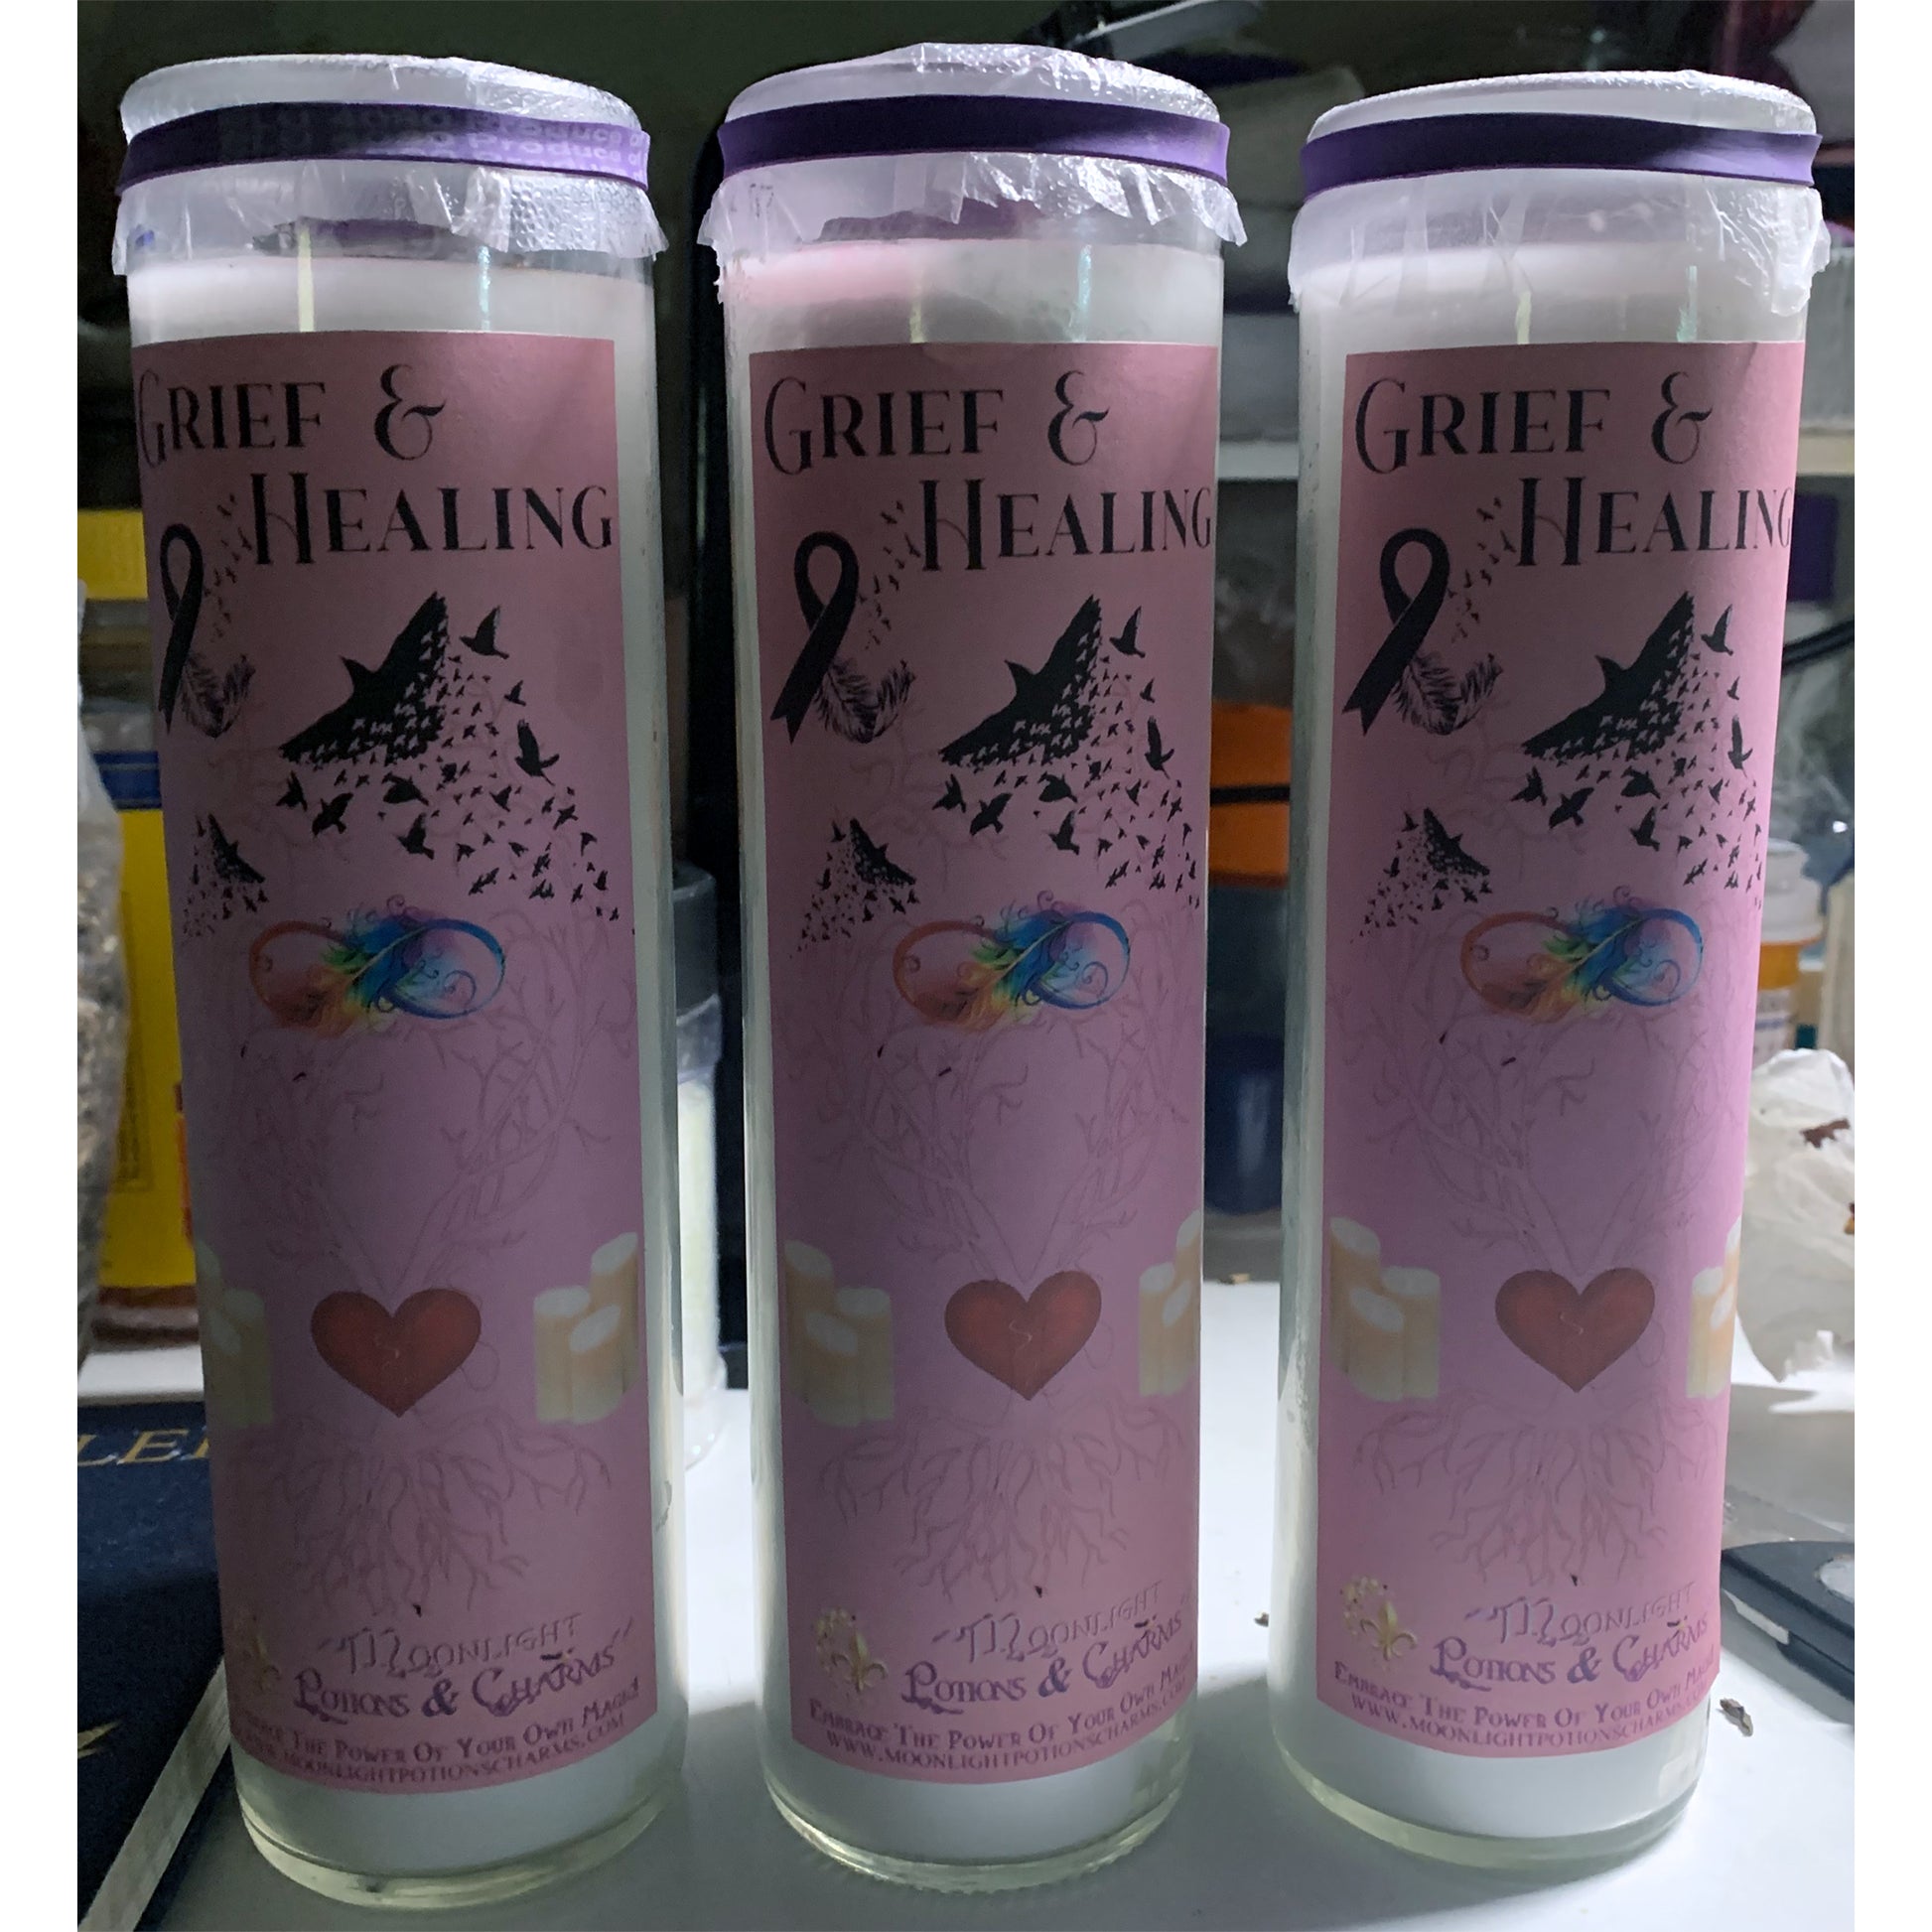 Grief & Healing Prayer Candle - Moonlight Potions & Charms